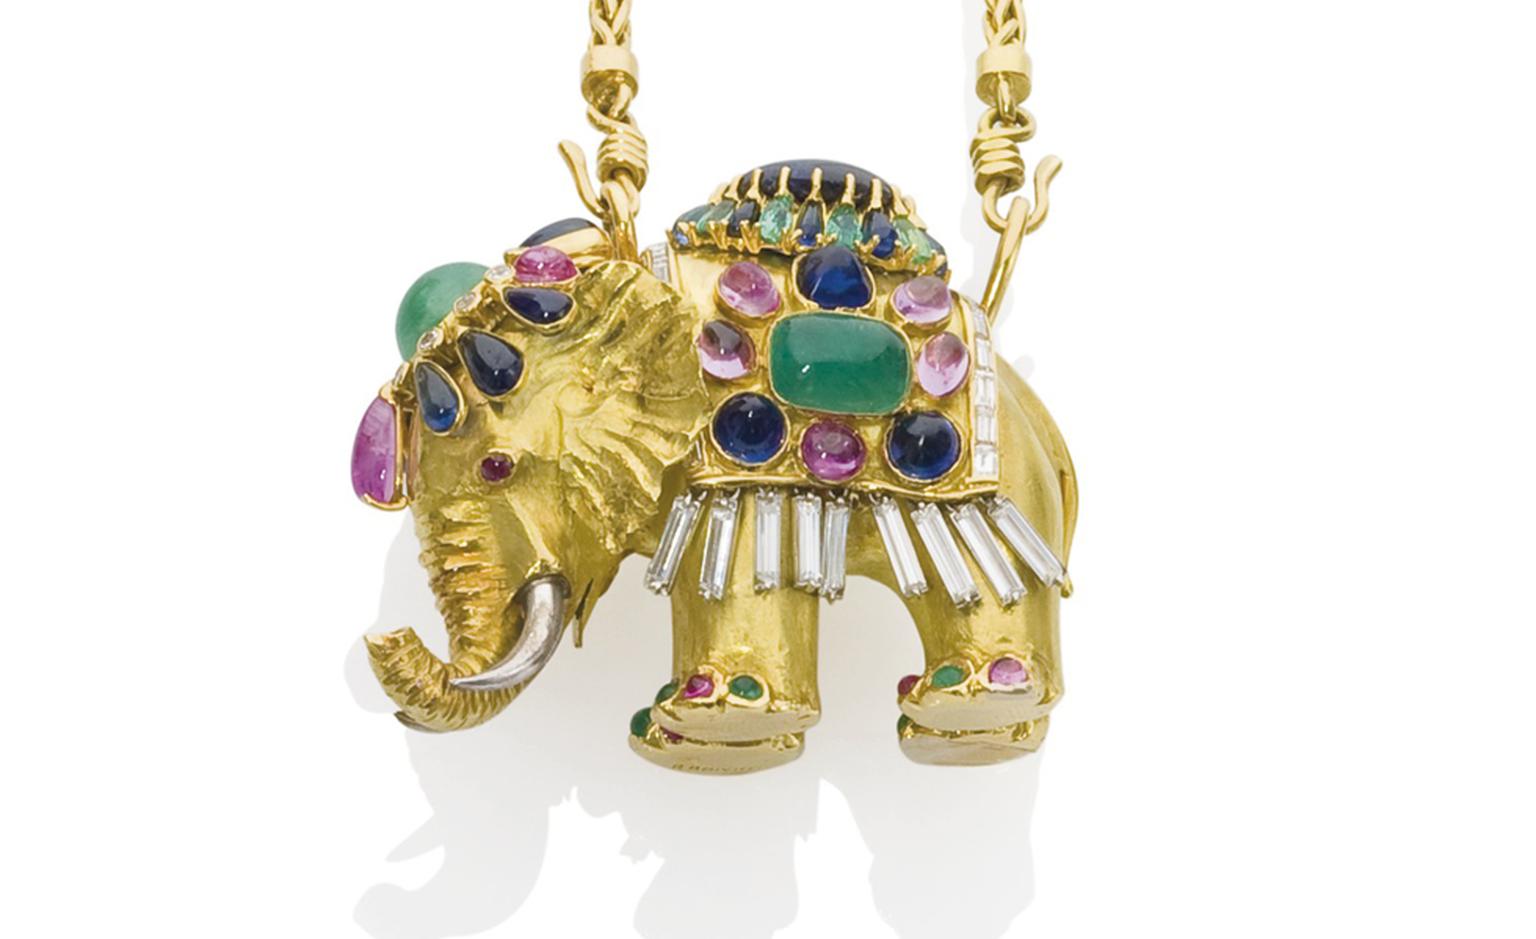 Lot 323, Gold elephant pendant by Rene Boivin, decorated with sapphires, emeralds and diamonds. Estimate €20,000 - €30,000. SOLD FOR €109,000